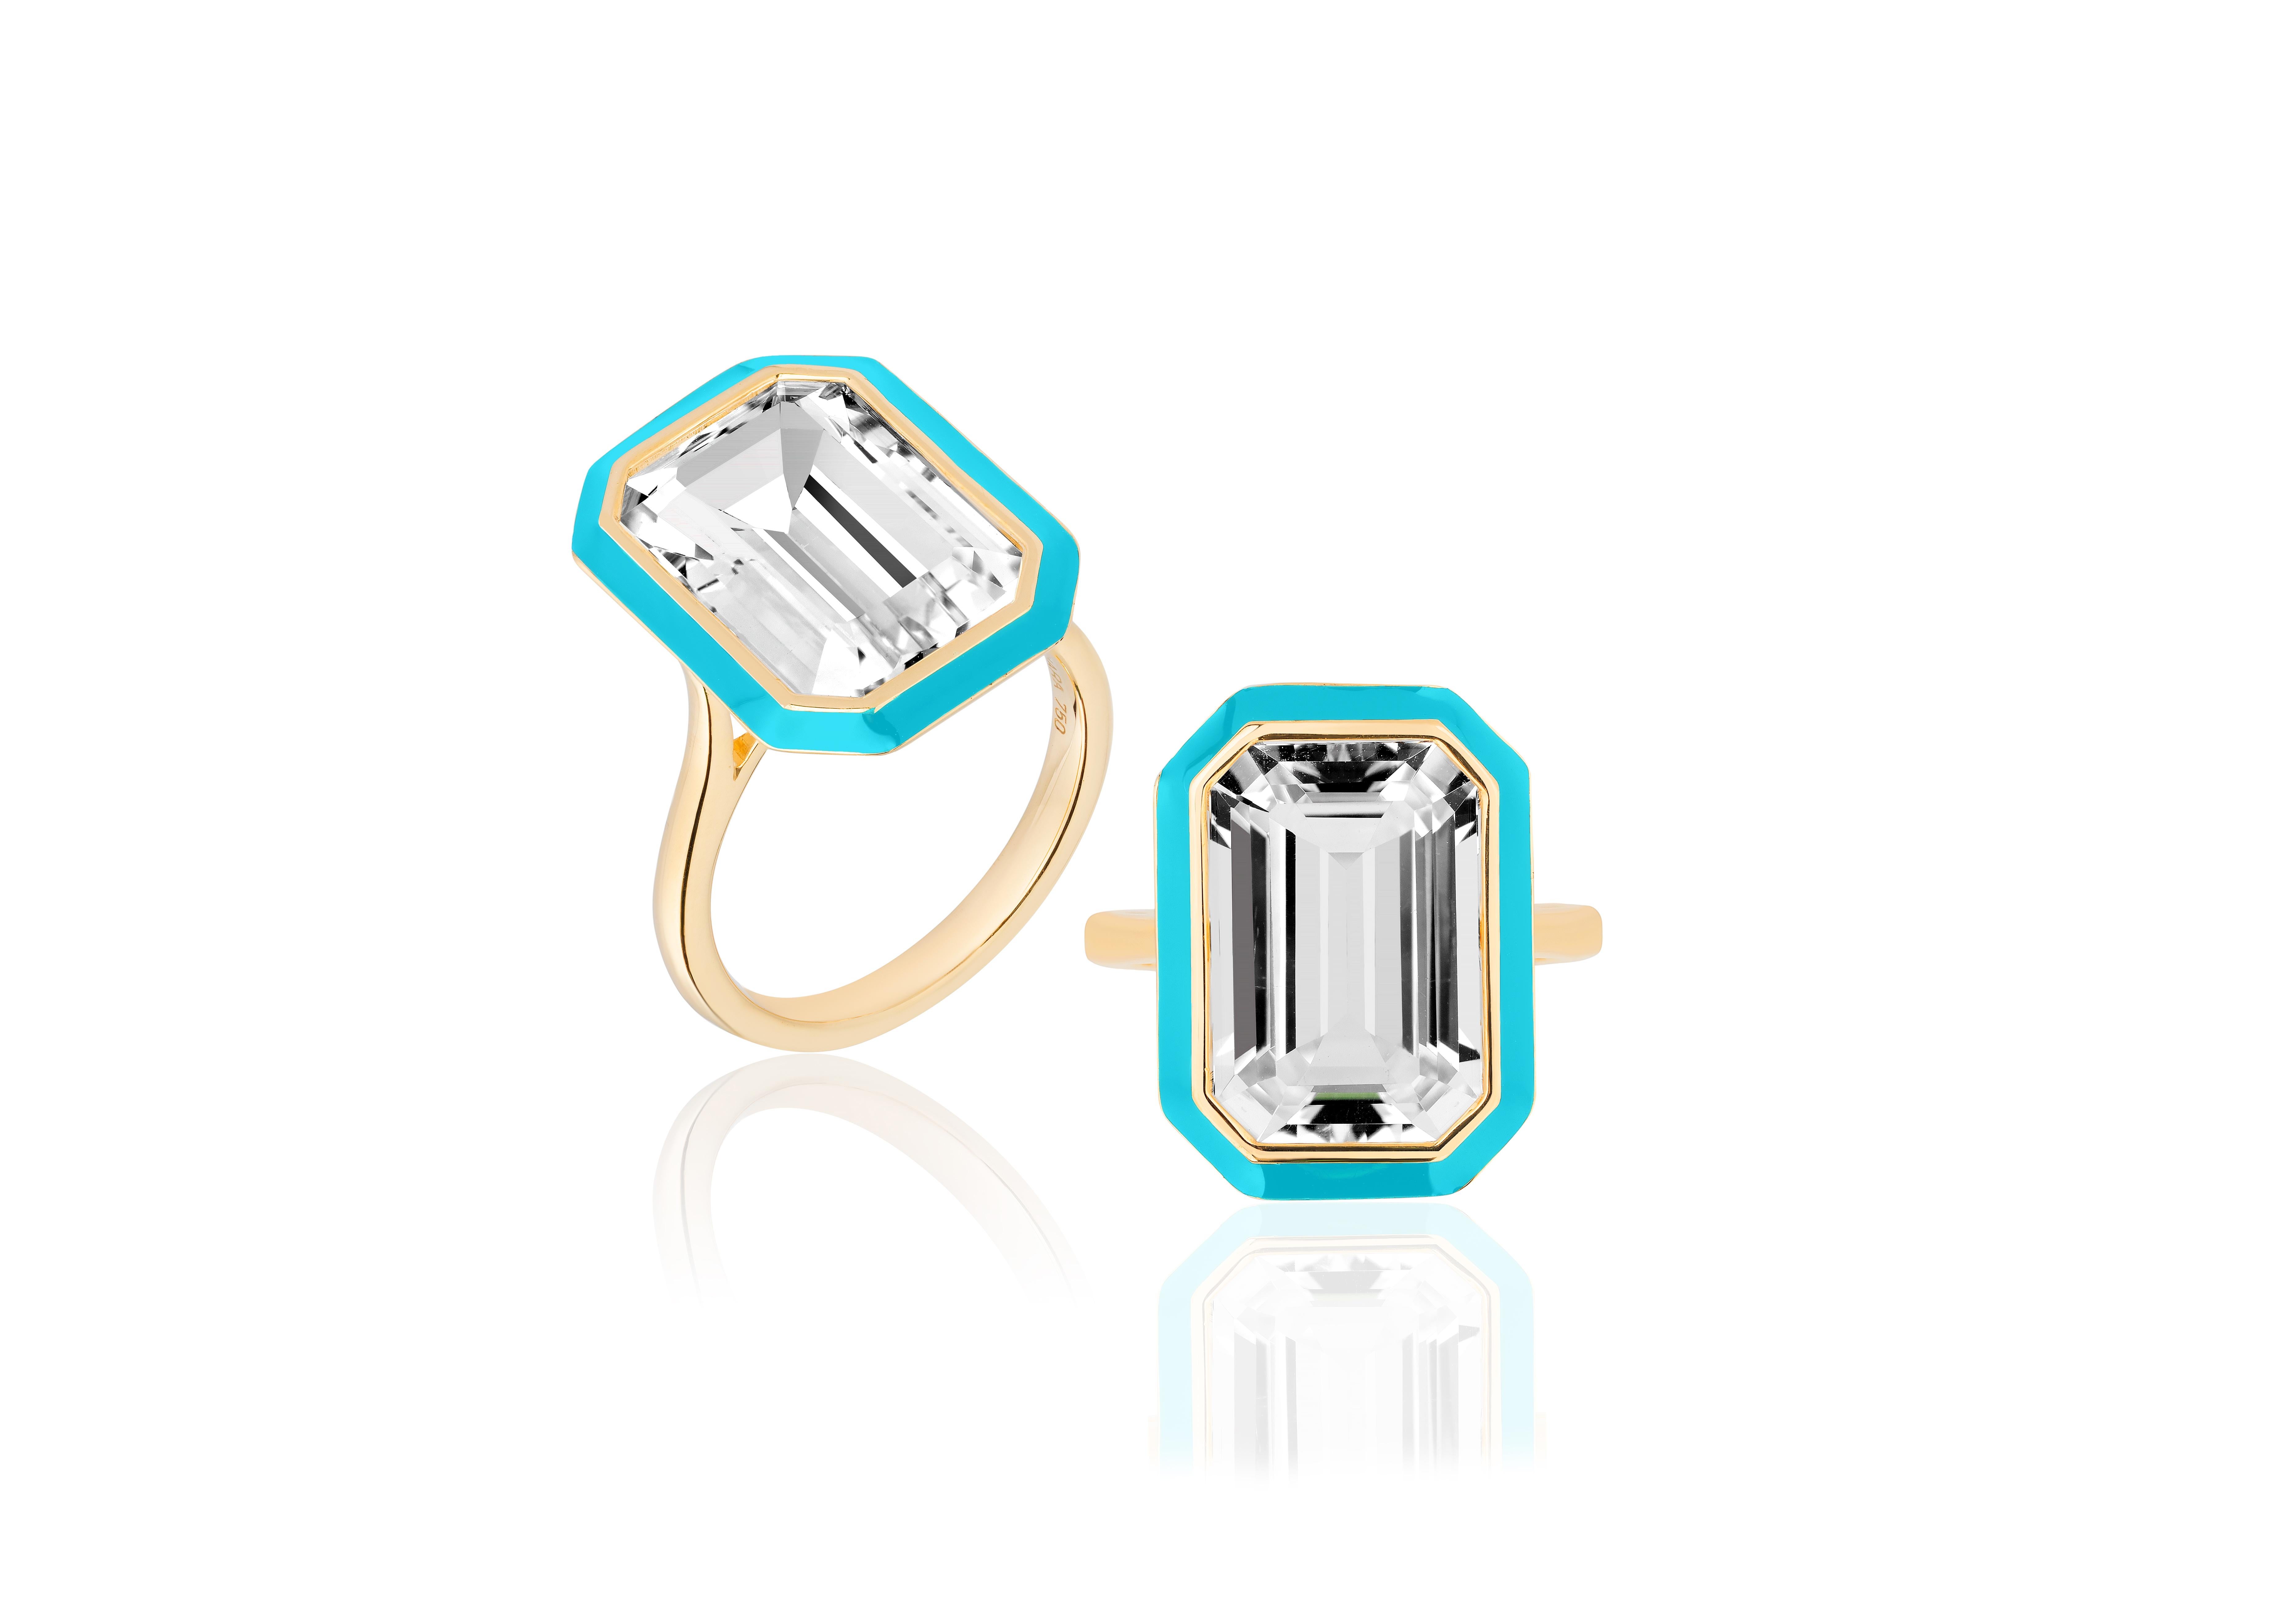 This is a unique combination of Rock Crystal and Turquoise enamel. If you want to make a statement this is the perfect ring to do it!

A 10 x 15 mm Rock Crystal Emerald cut ring in a bezel setting, with Turquoise enamel in the borders.

Gemstone: